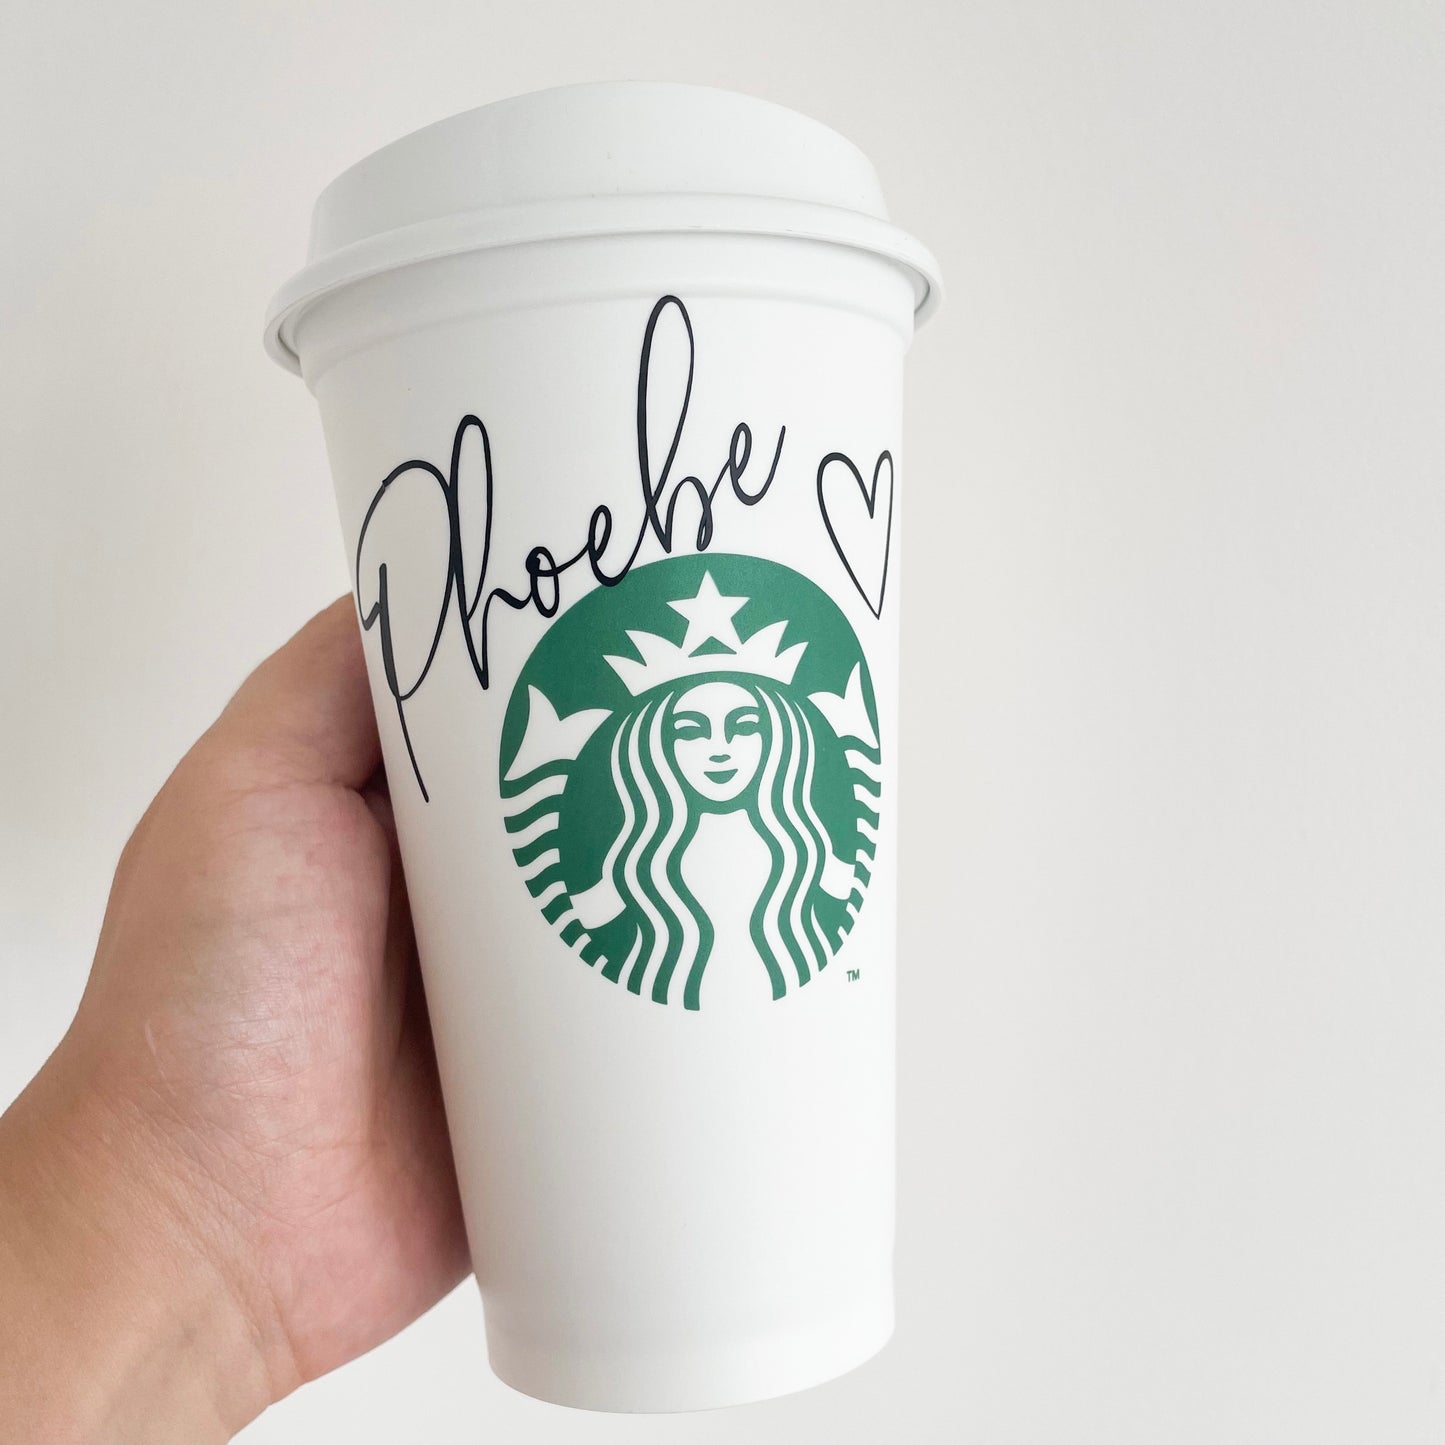 Starbucks Venti Reusable Cups with Name Personalization